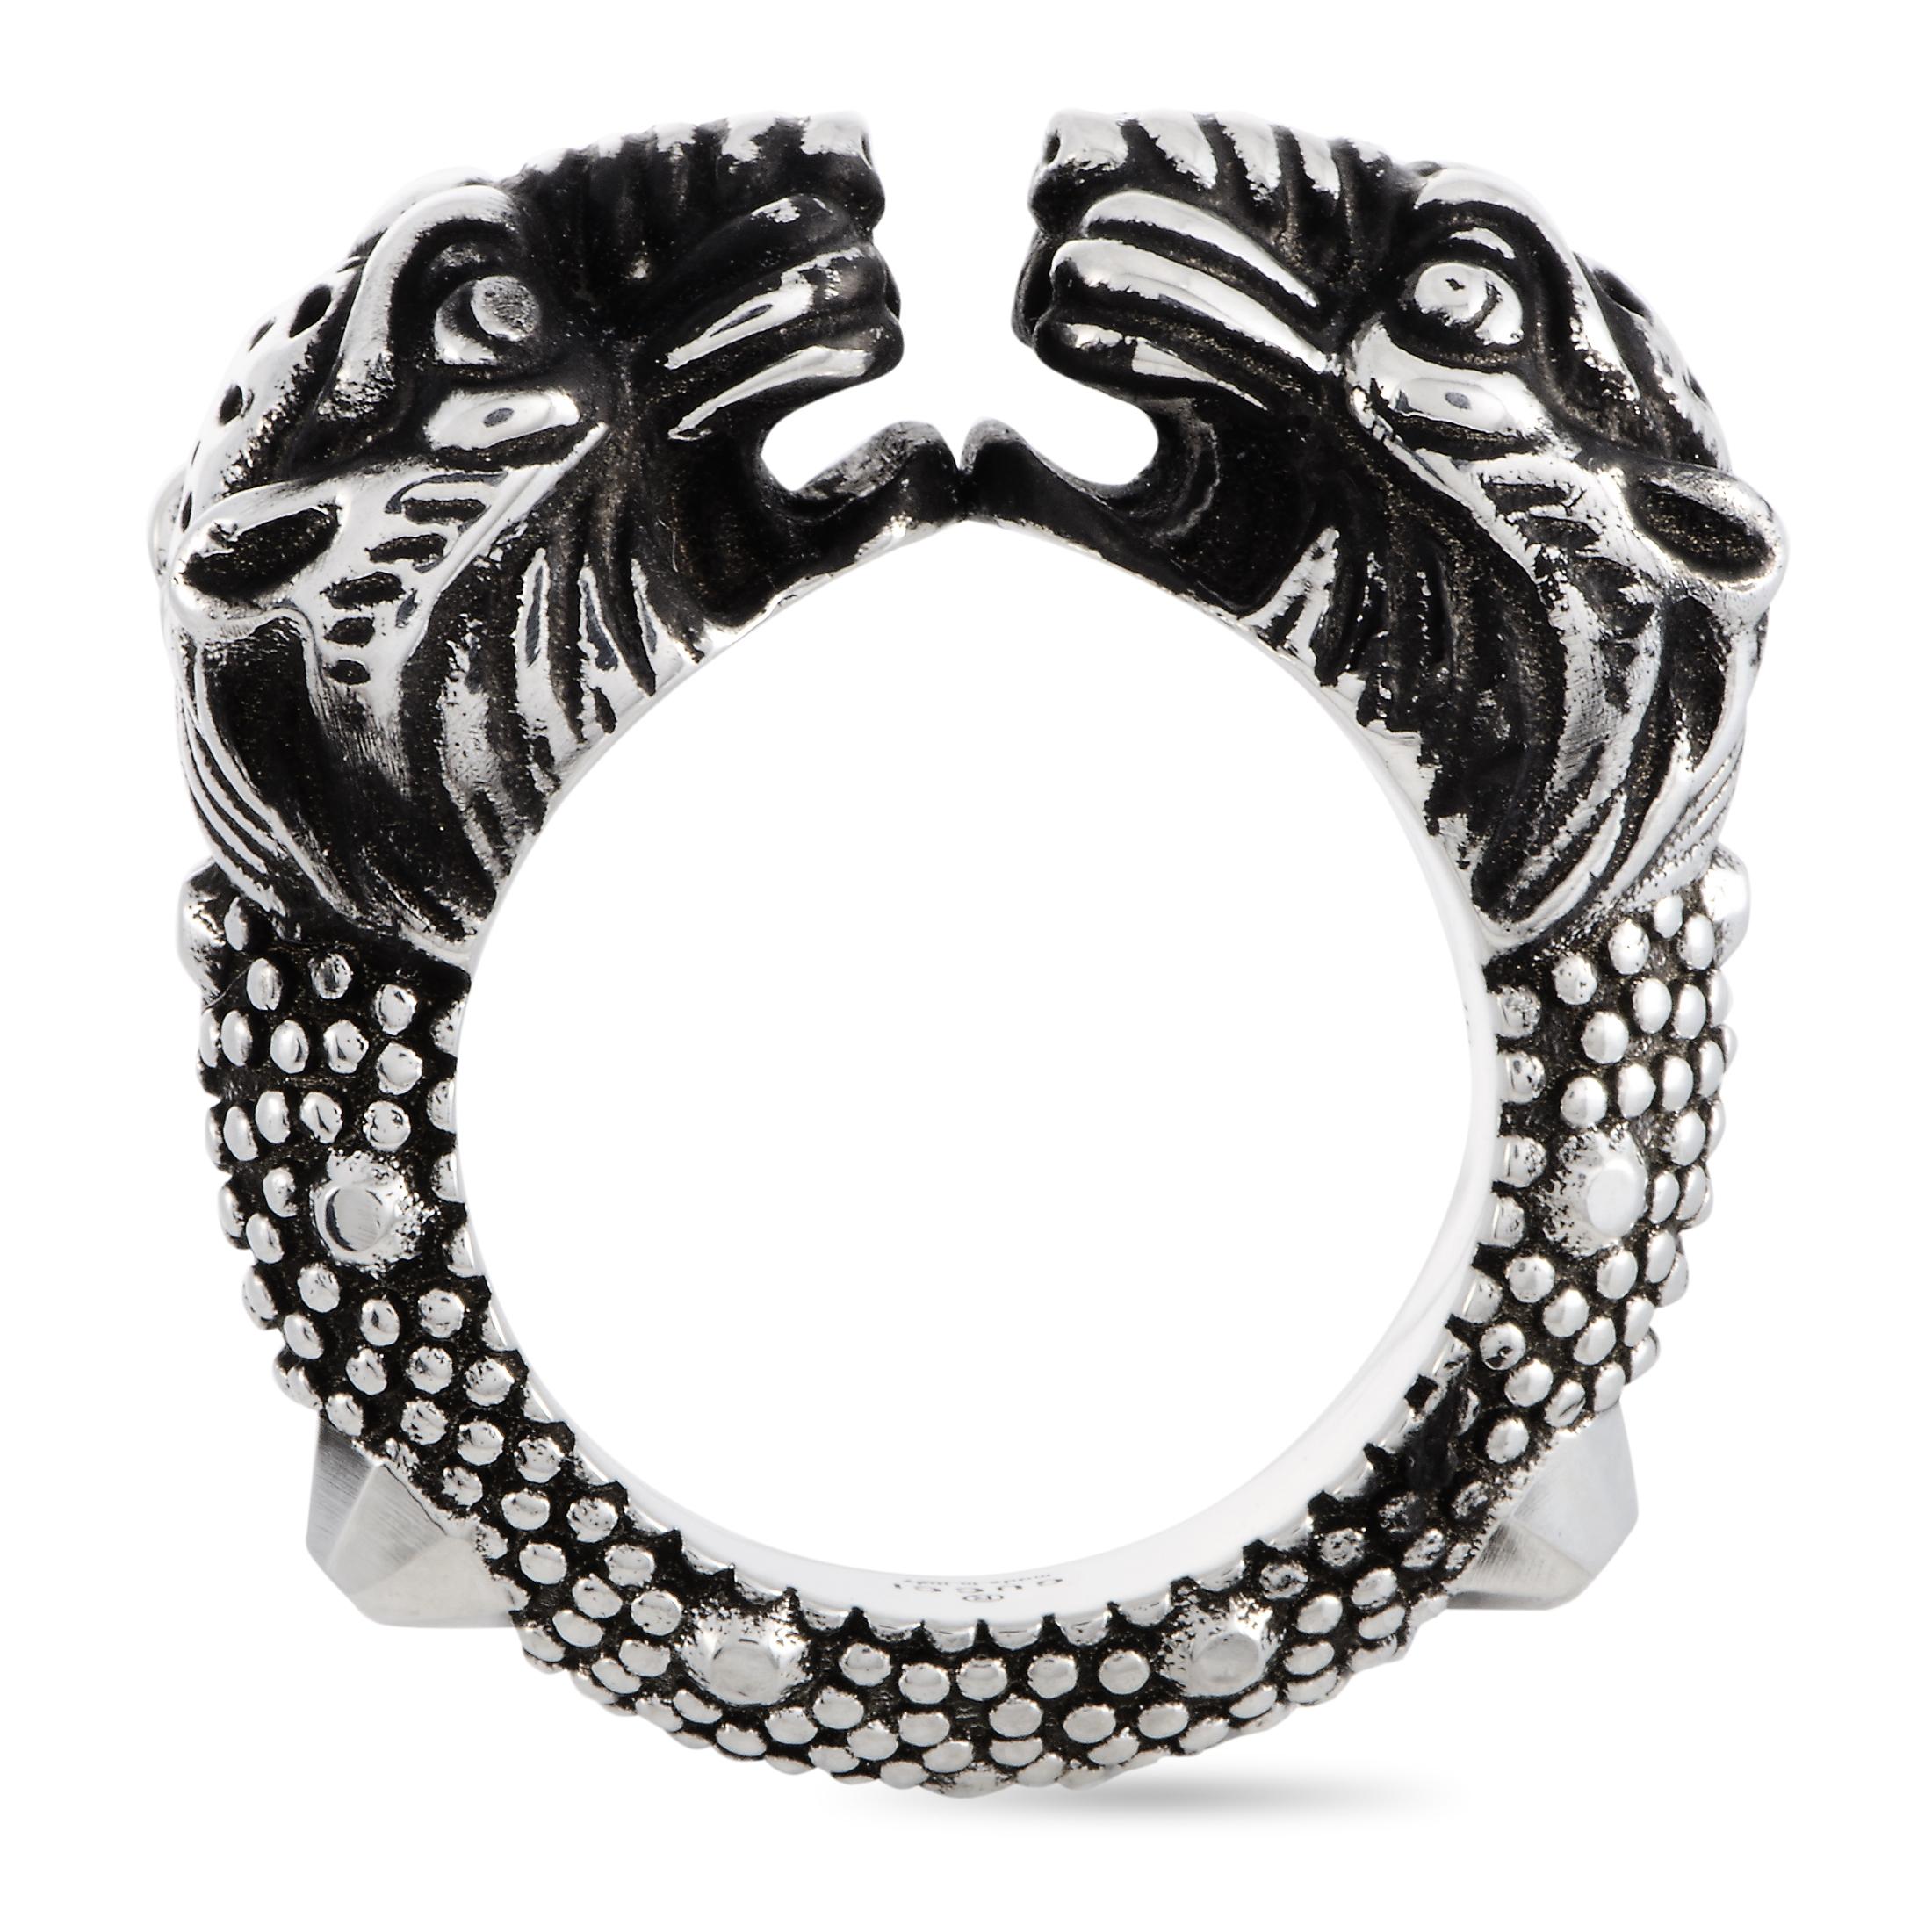 The Gucci “Vintage Tiger” ring is crafted from silver and weighs 16.7 grams. The ring boasts band thickness of 7 mm and top height of 10 mm, while top dimensions measure 12 by 30 mm.
 
 This item is offered in brand new condition and includes the